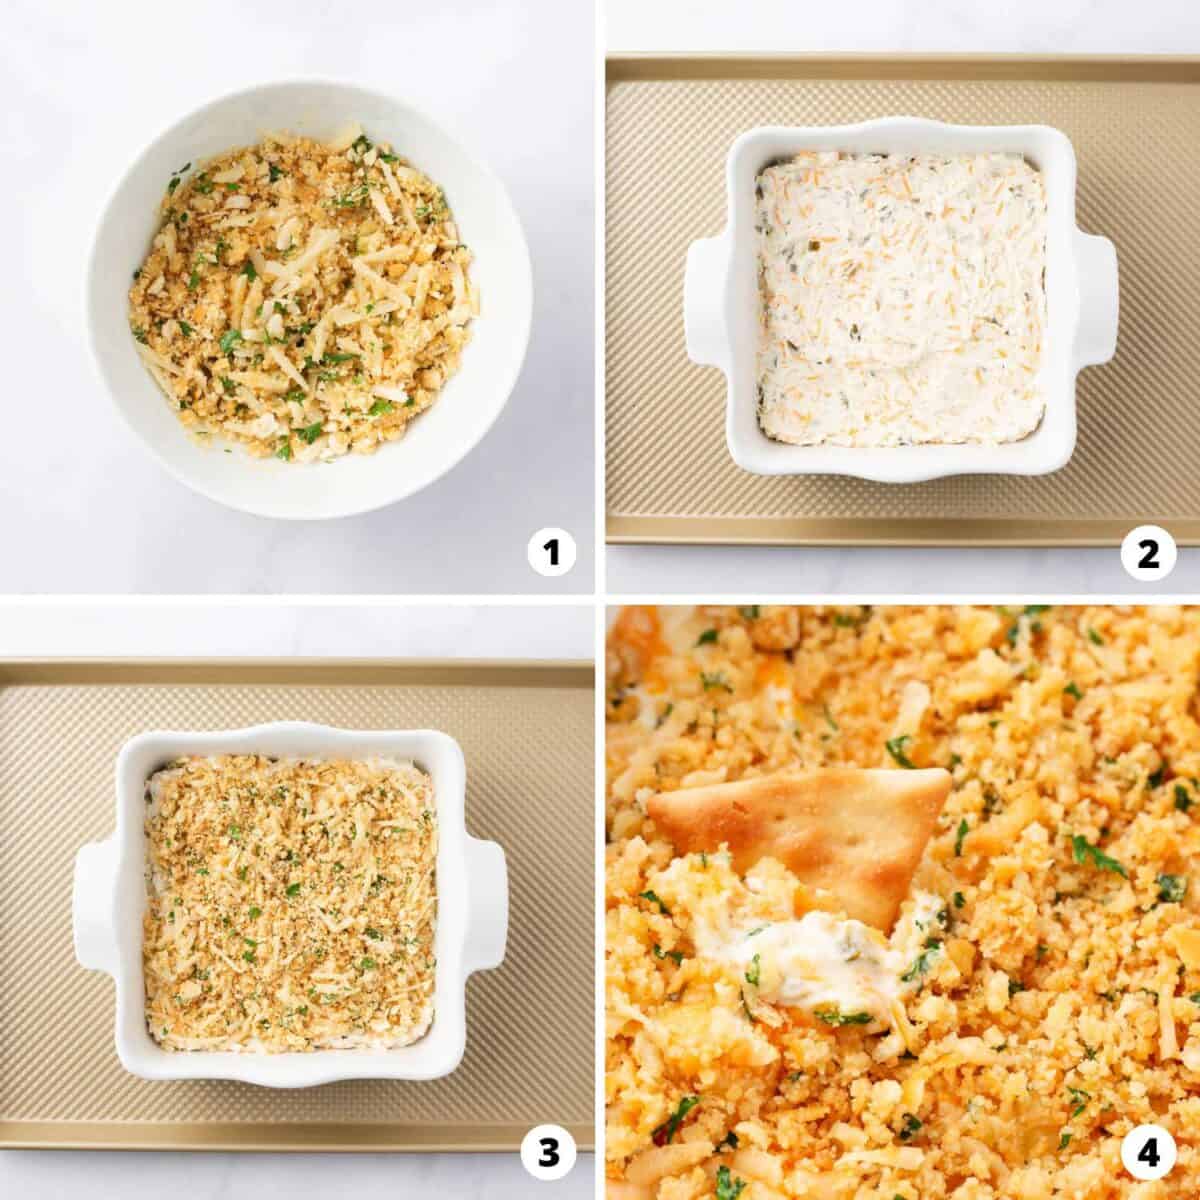 Showing how to make jalapeno popper dip in a 4 step collage.